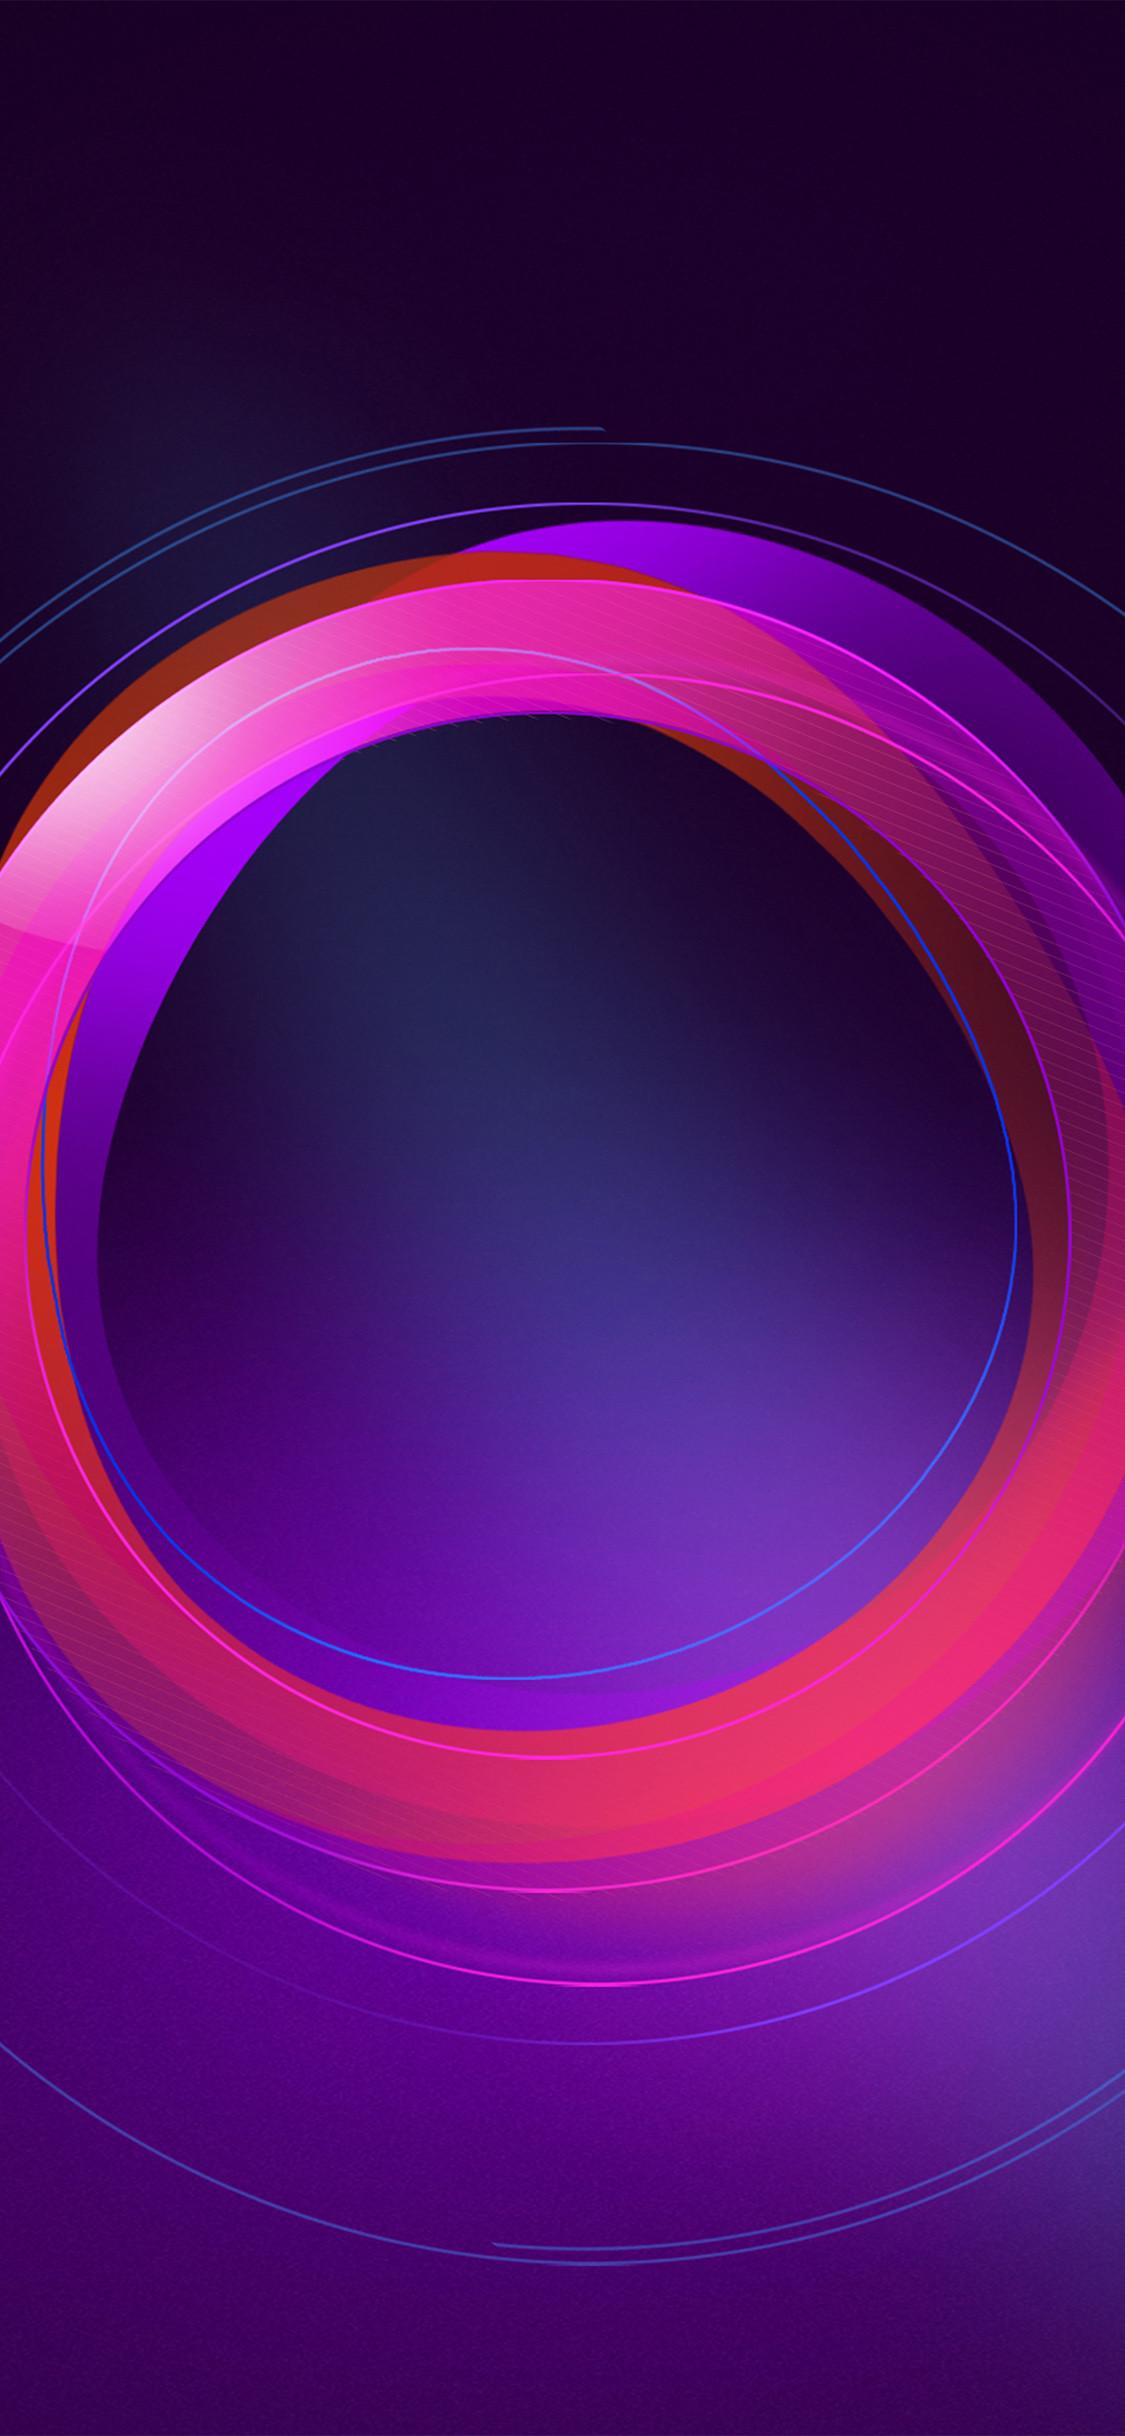 1125x2436 iPhoneXpapers.com | iPhone X wallpaper | vw26-circle-abstract-purple -pattern-background